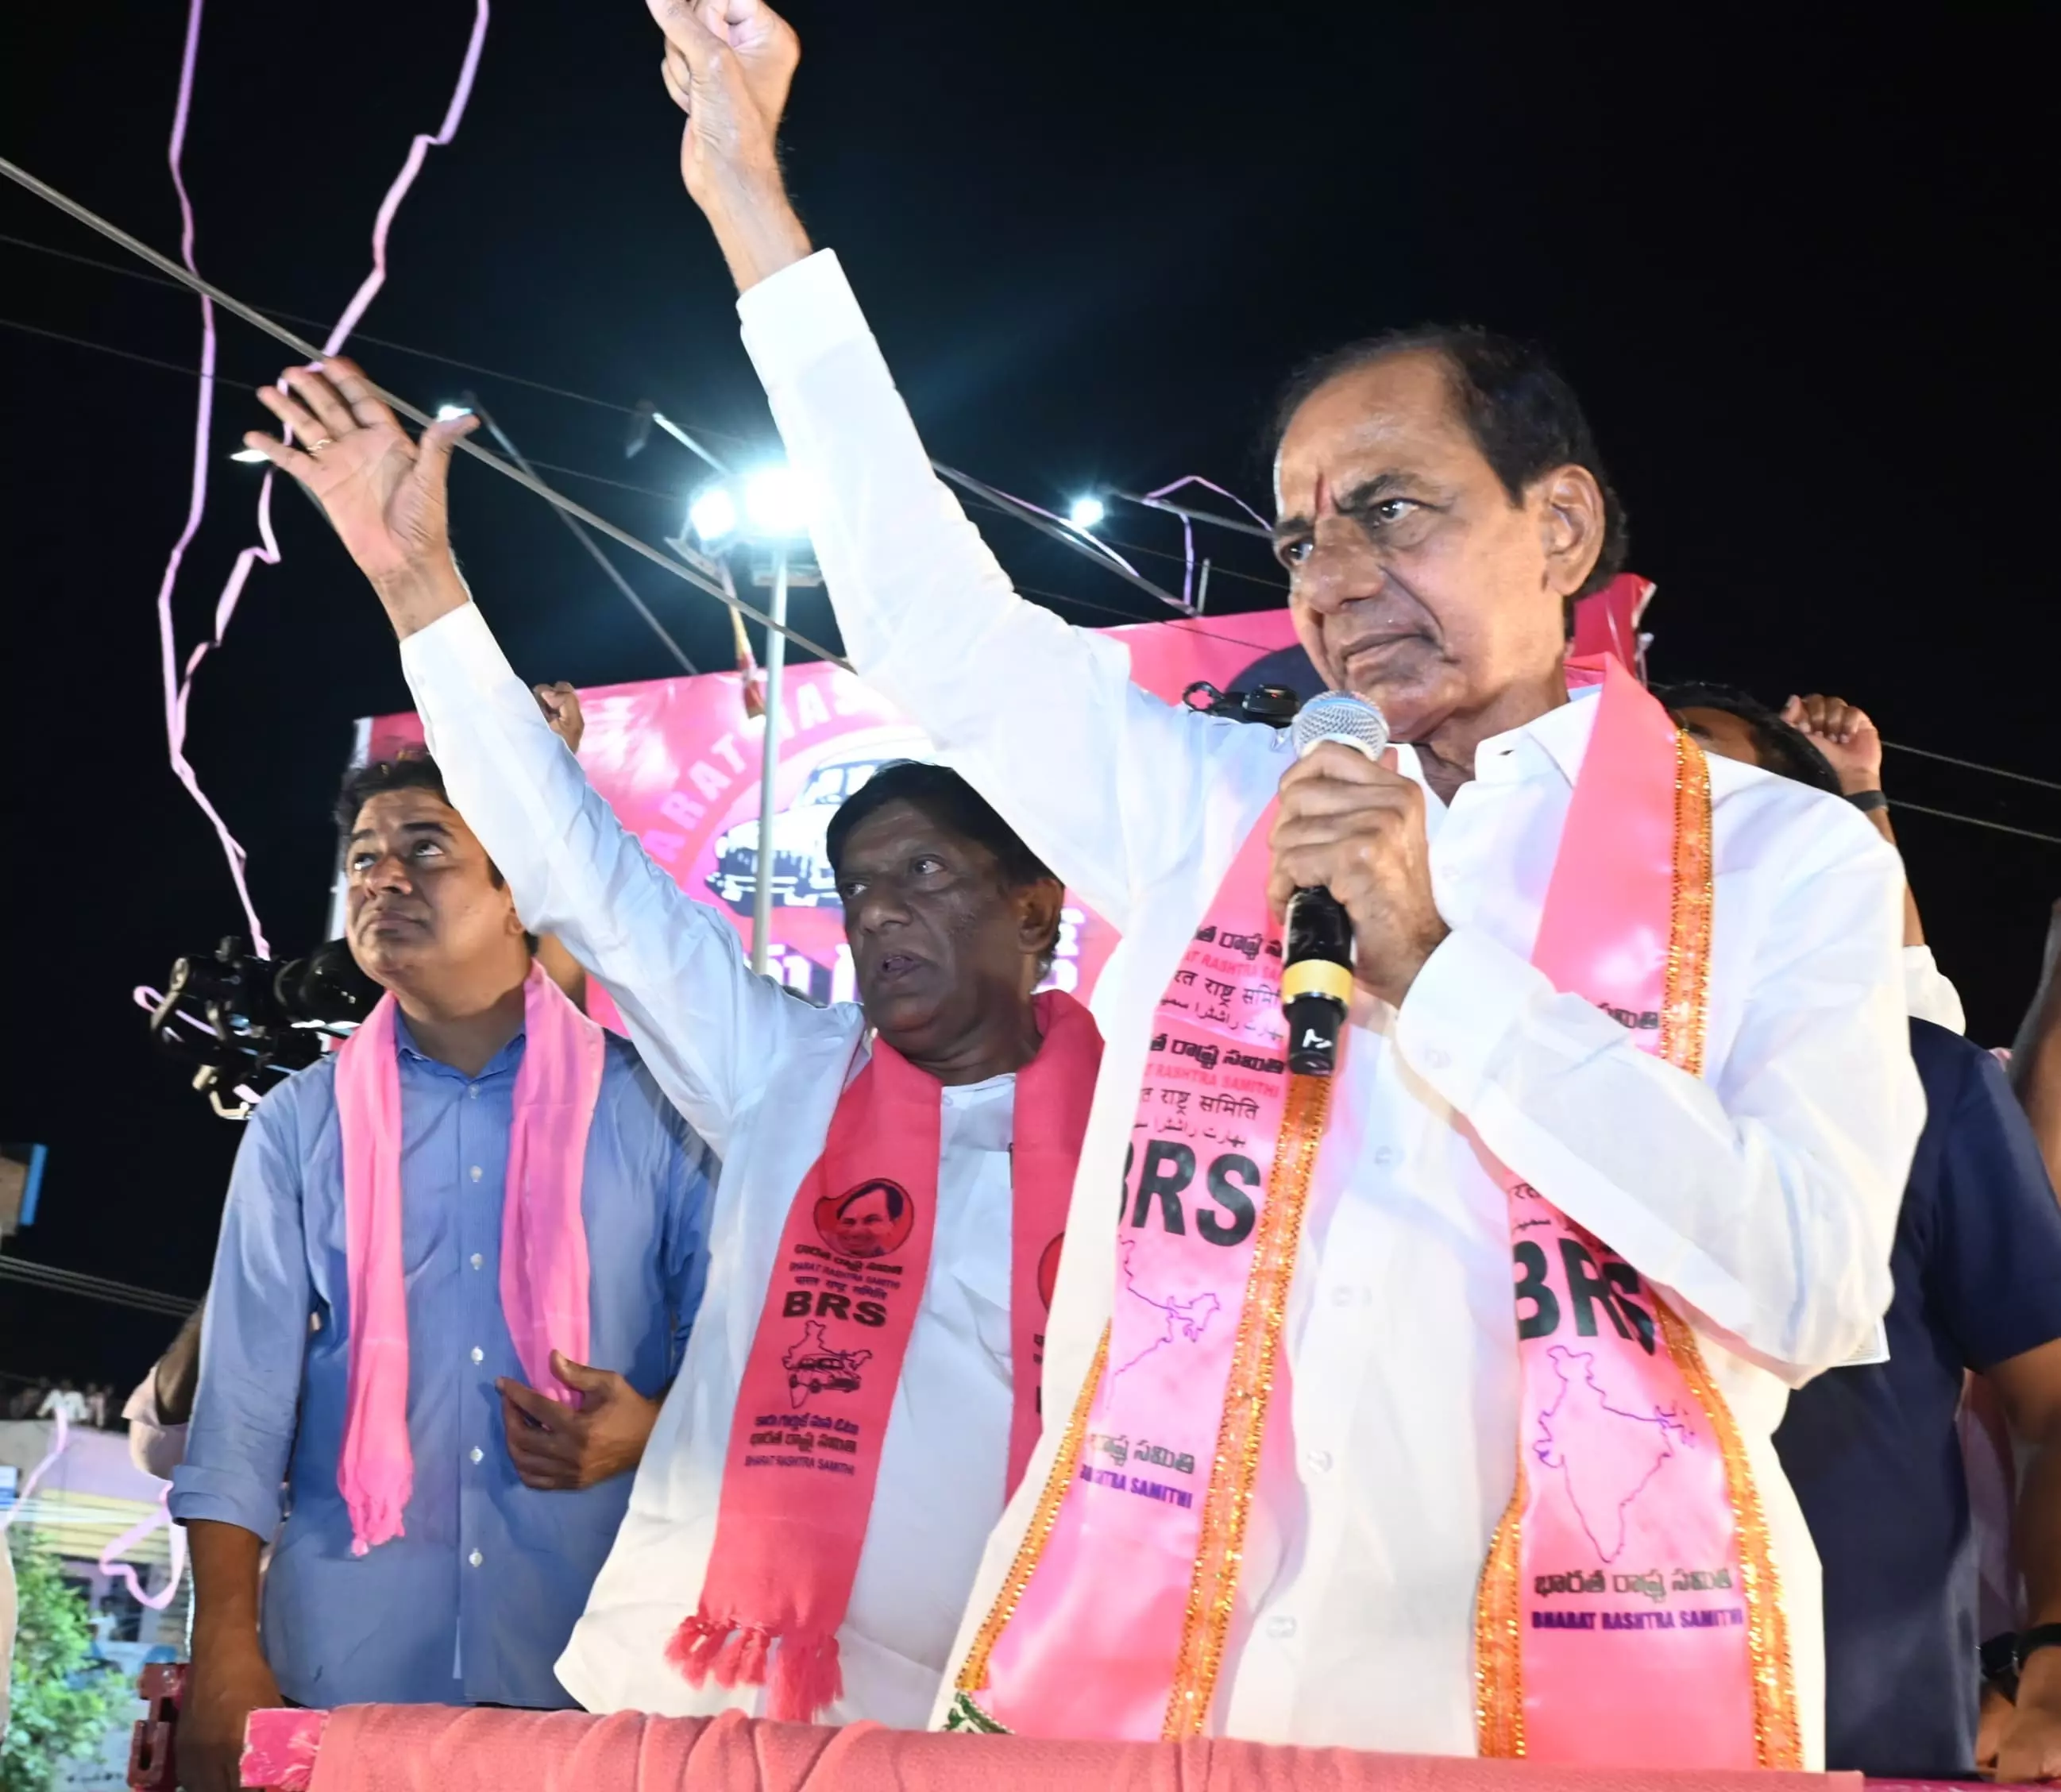 BJP promotes enmity among people, Congress fails to keep word: KCR